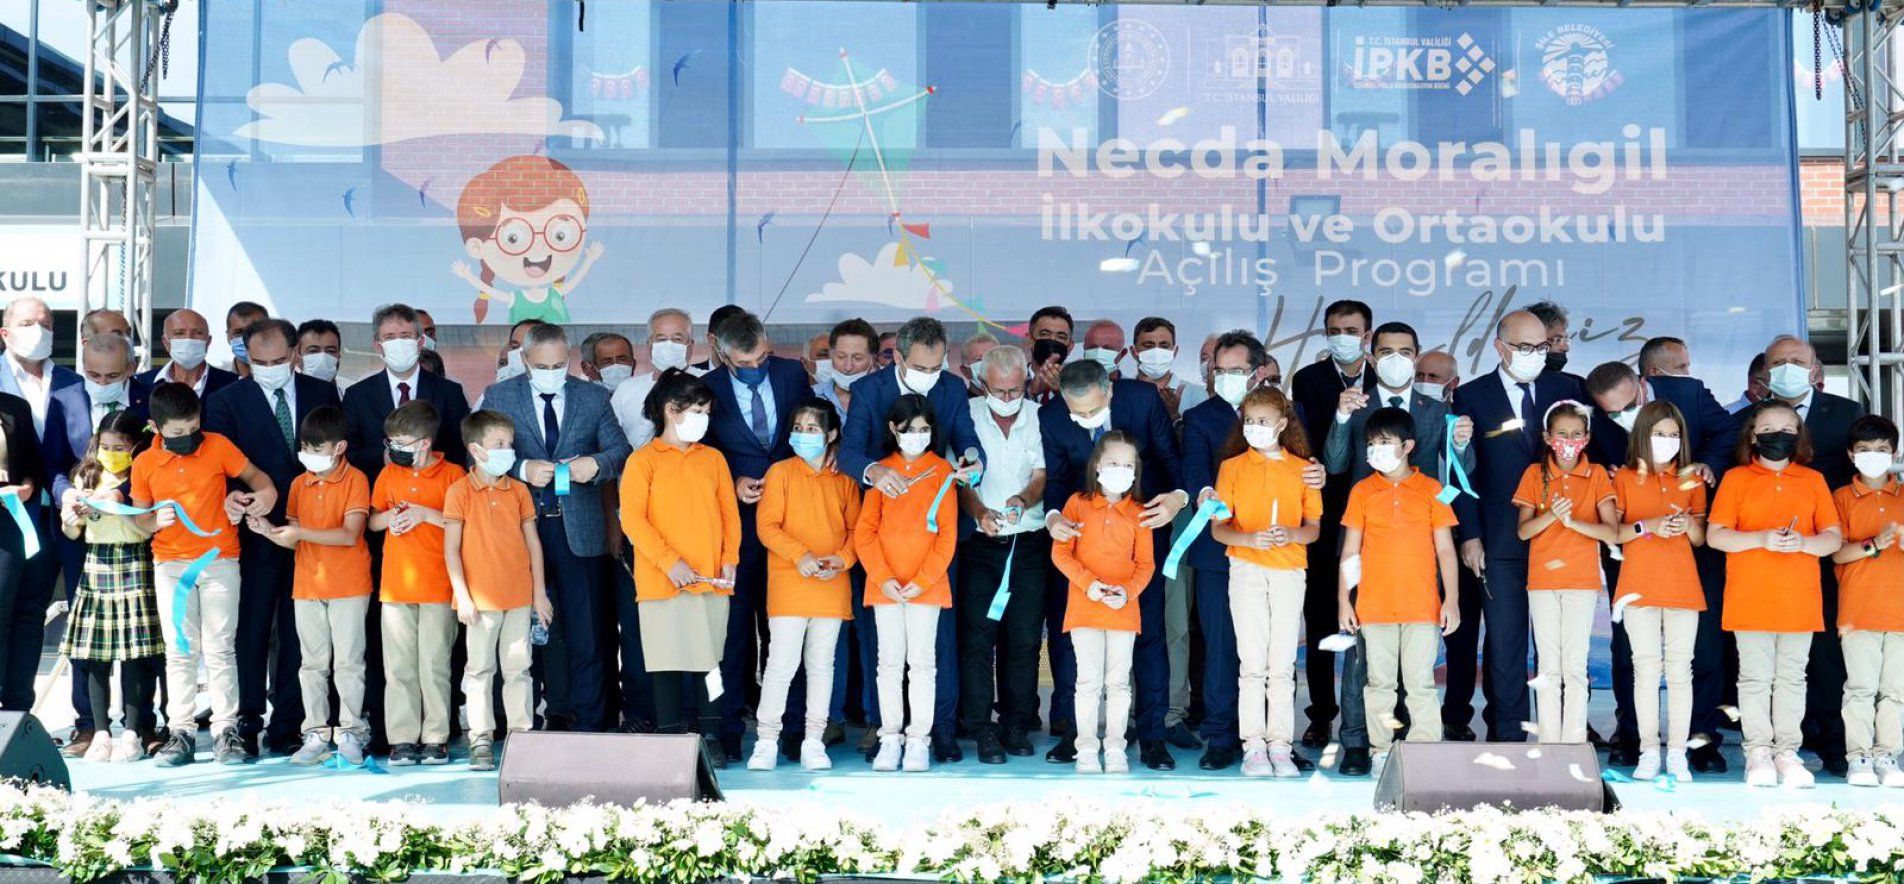 MINISTER ÖZER REOPENS SCHOOLS IN İSTANBUL